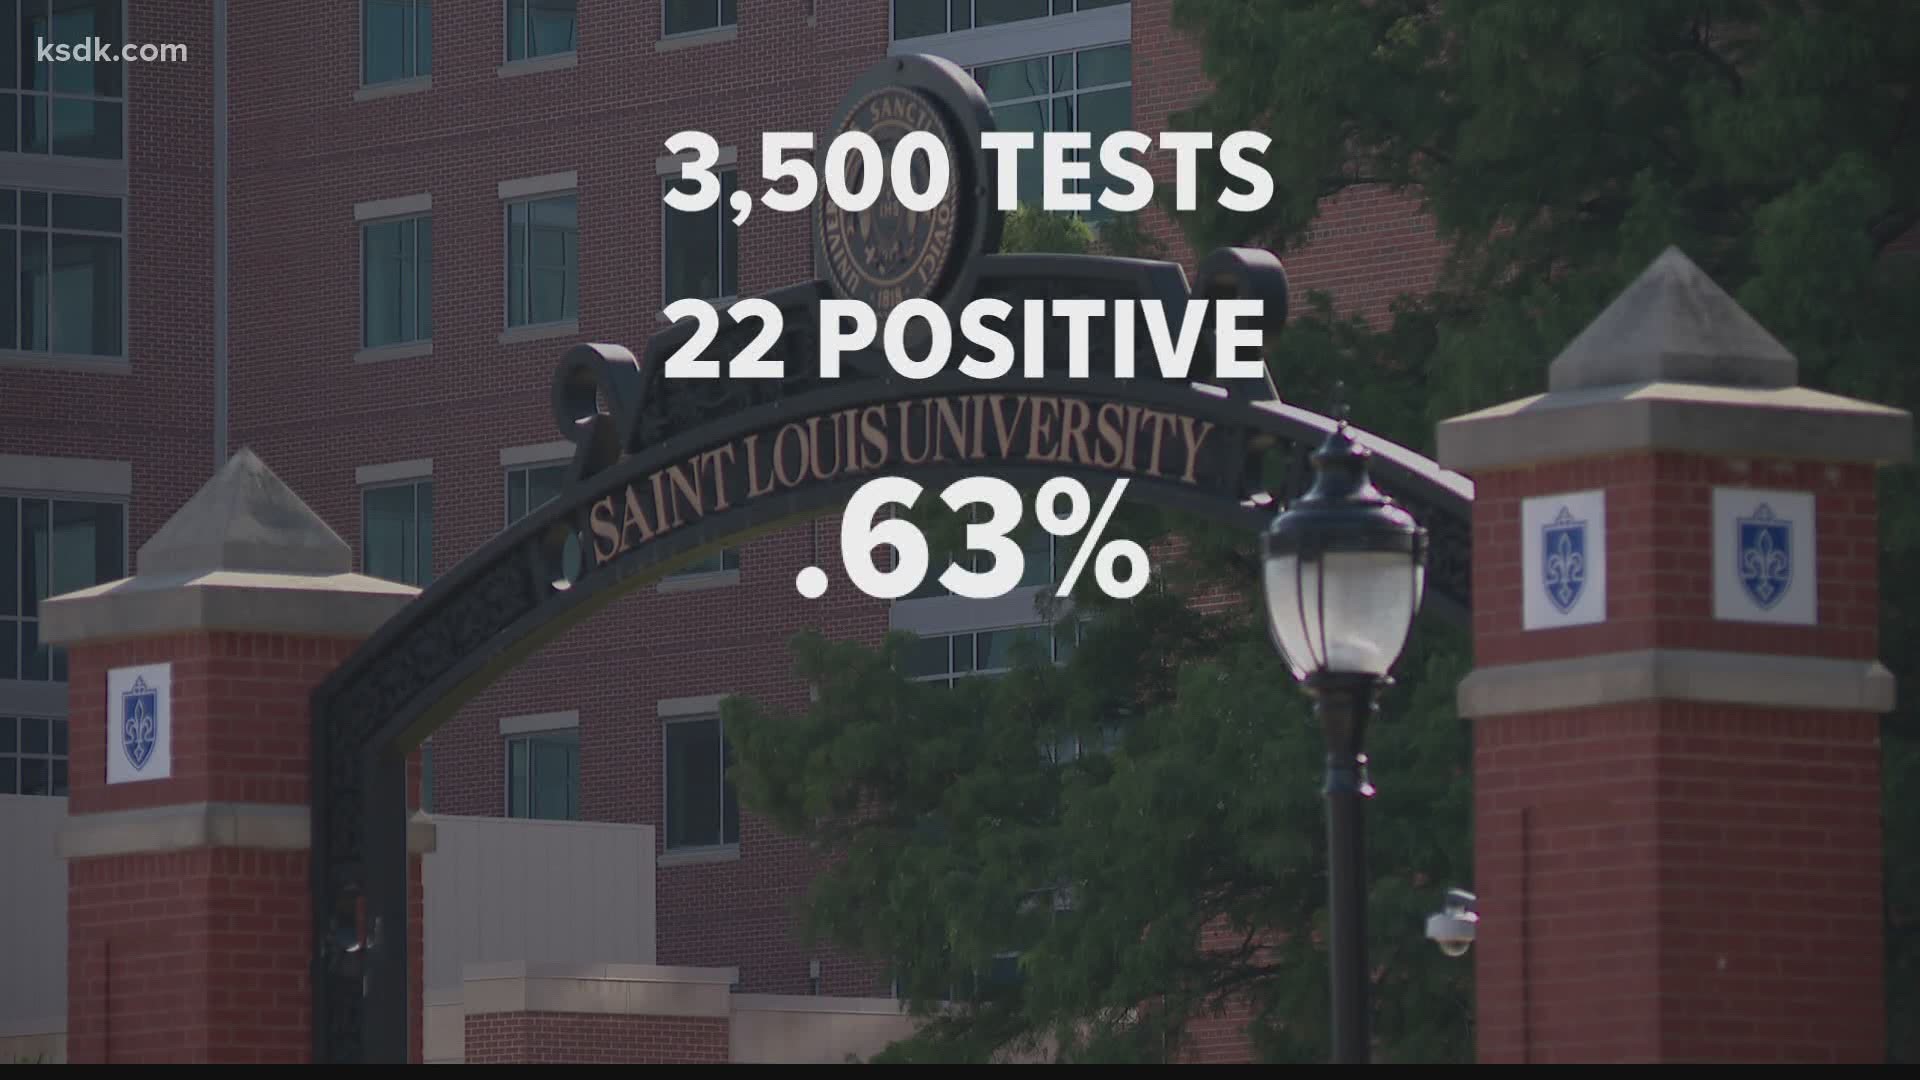 Fewer students tested positive than the school anticipated.